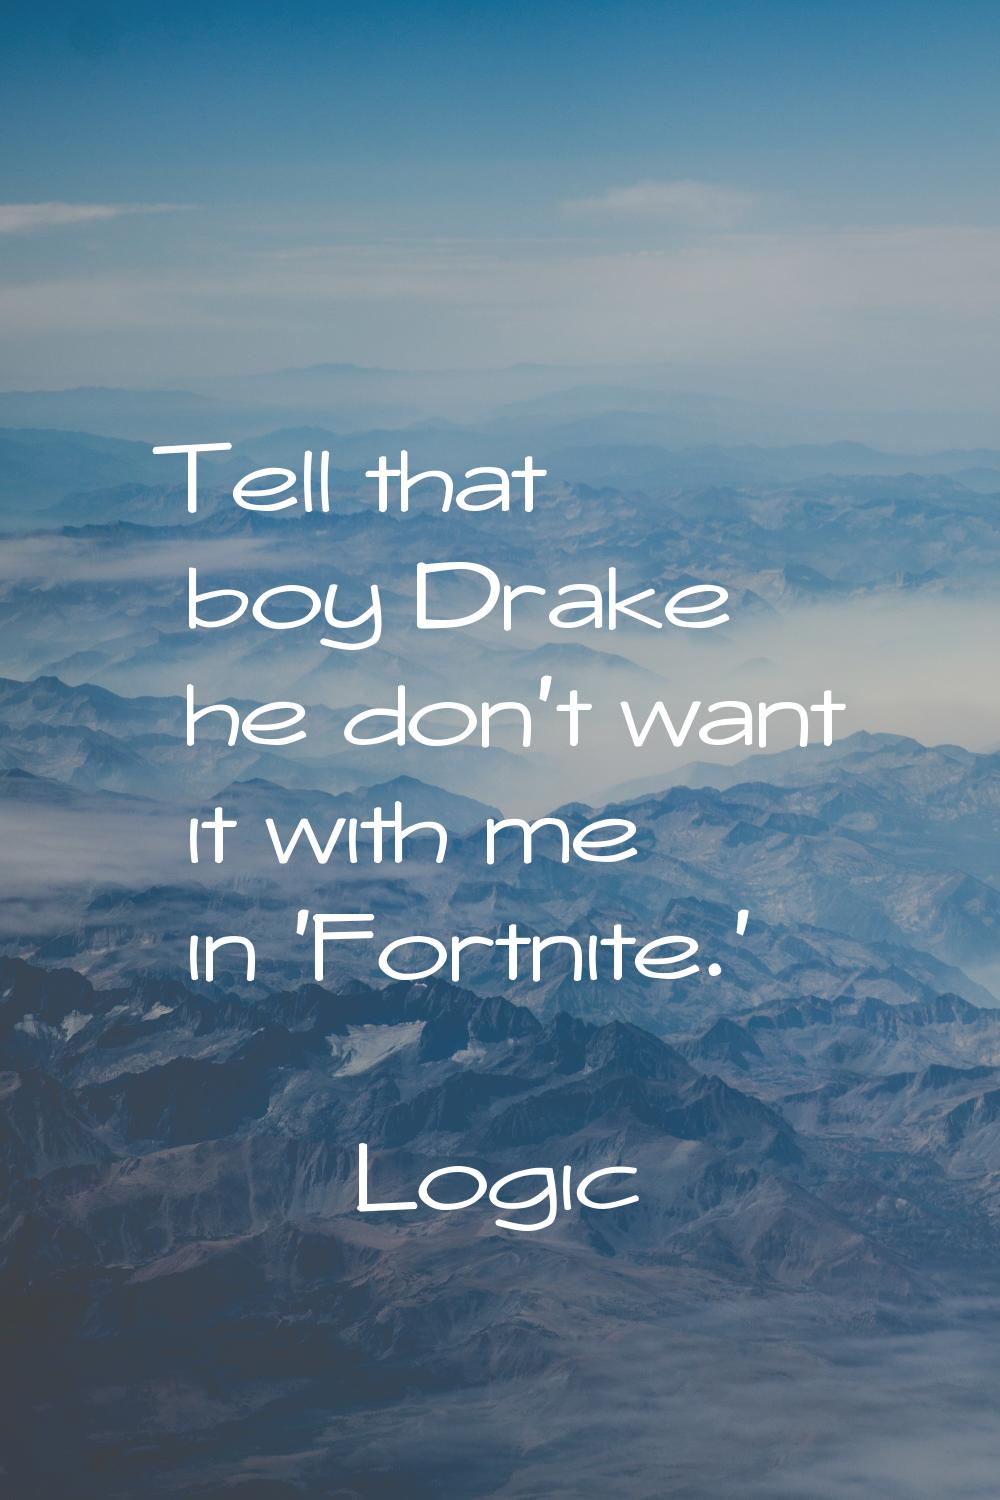 Tell that boy Drake he don't want it with me in 'Fortnite.'